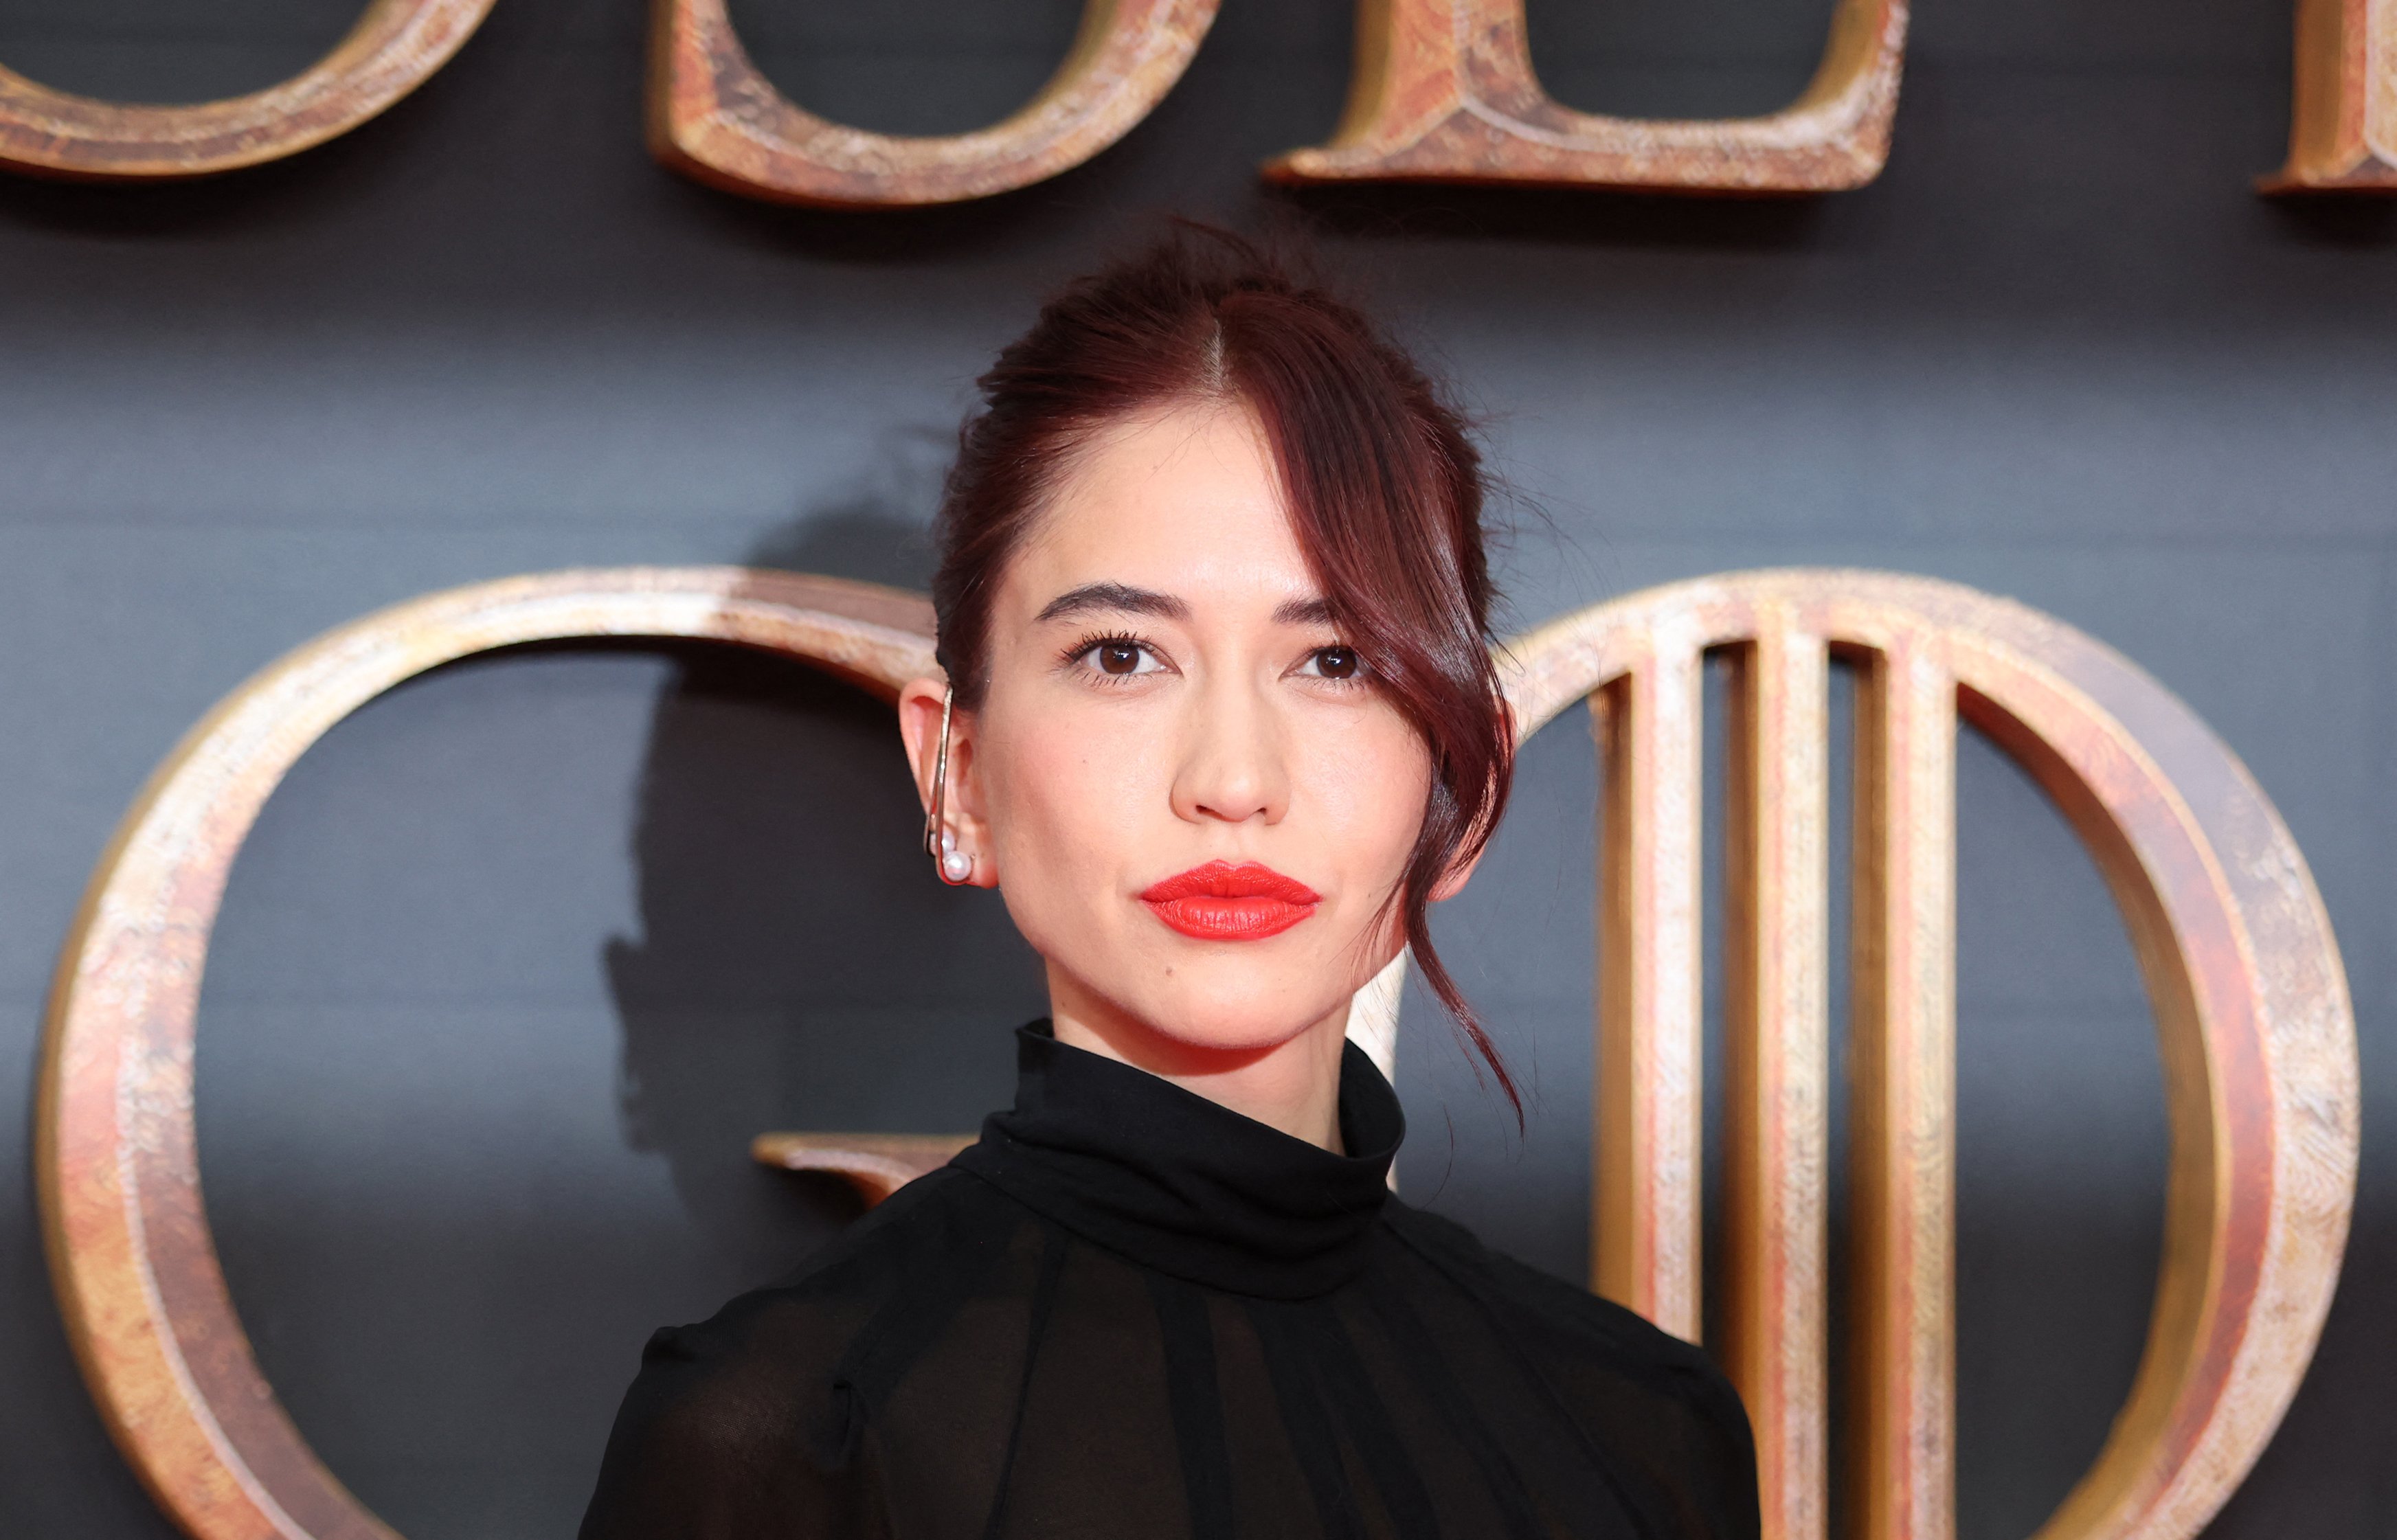 Sonoya Mizuno at the London premiere of "House of the Dragon" on August 15, 2022 | Source: Getty Images